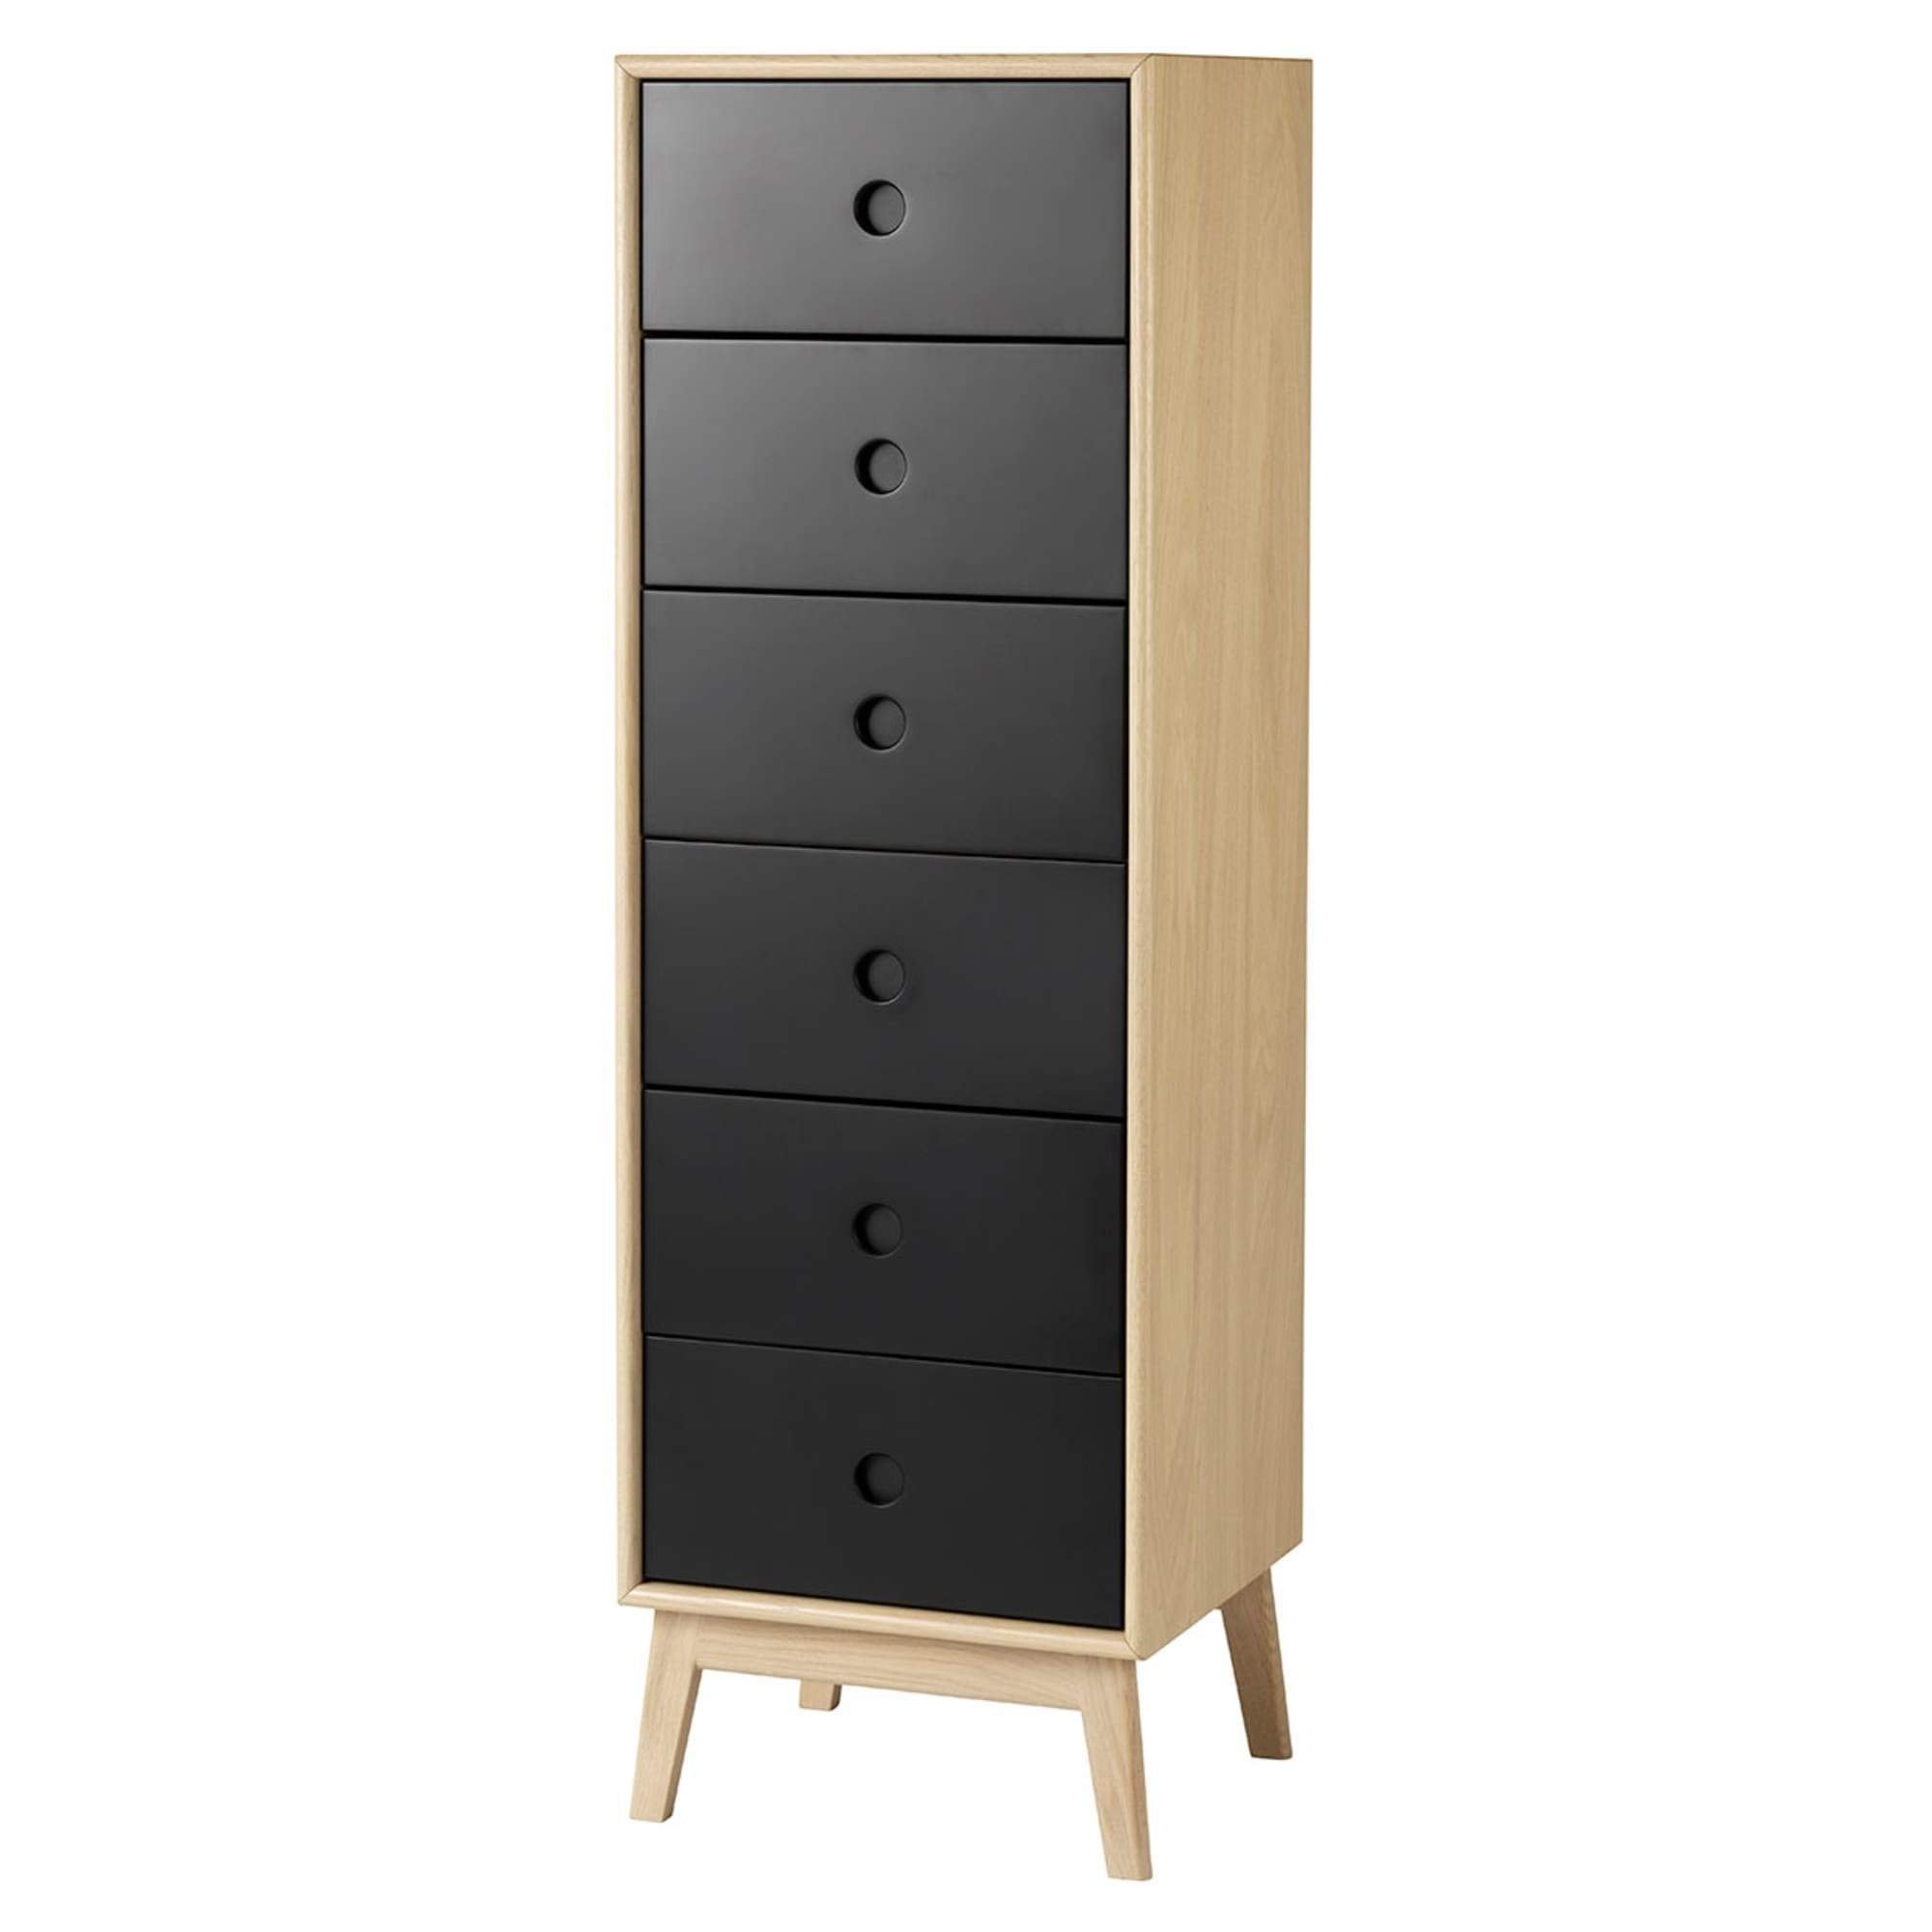 Fdb Møbler F23 Butler High Chest Of Drawers, Natural/Black